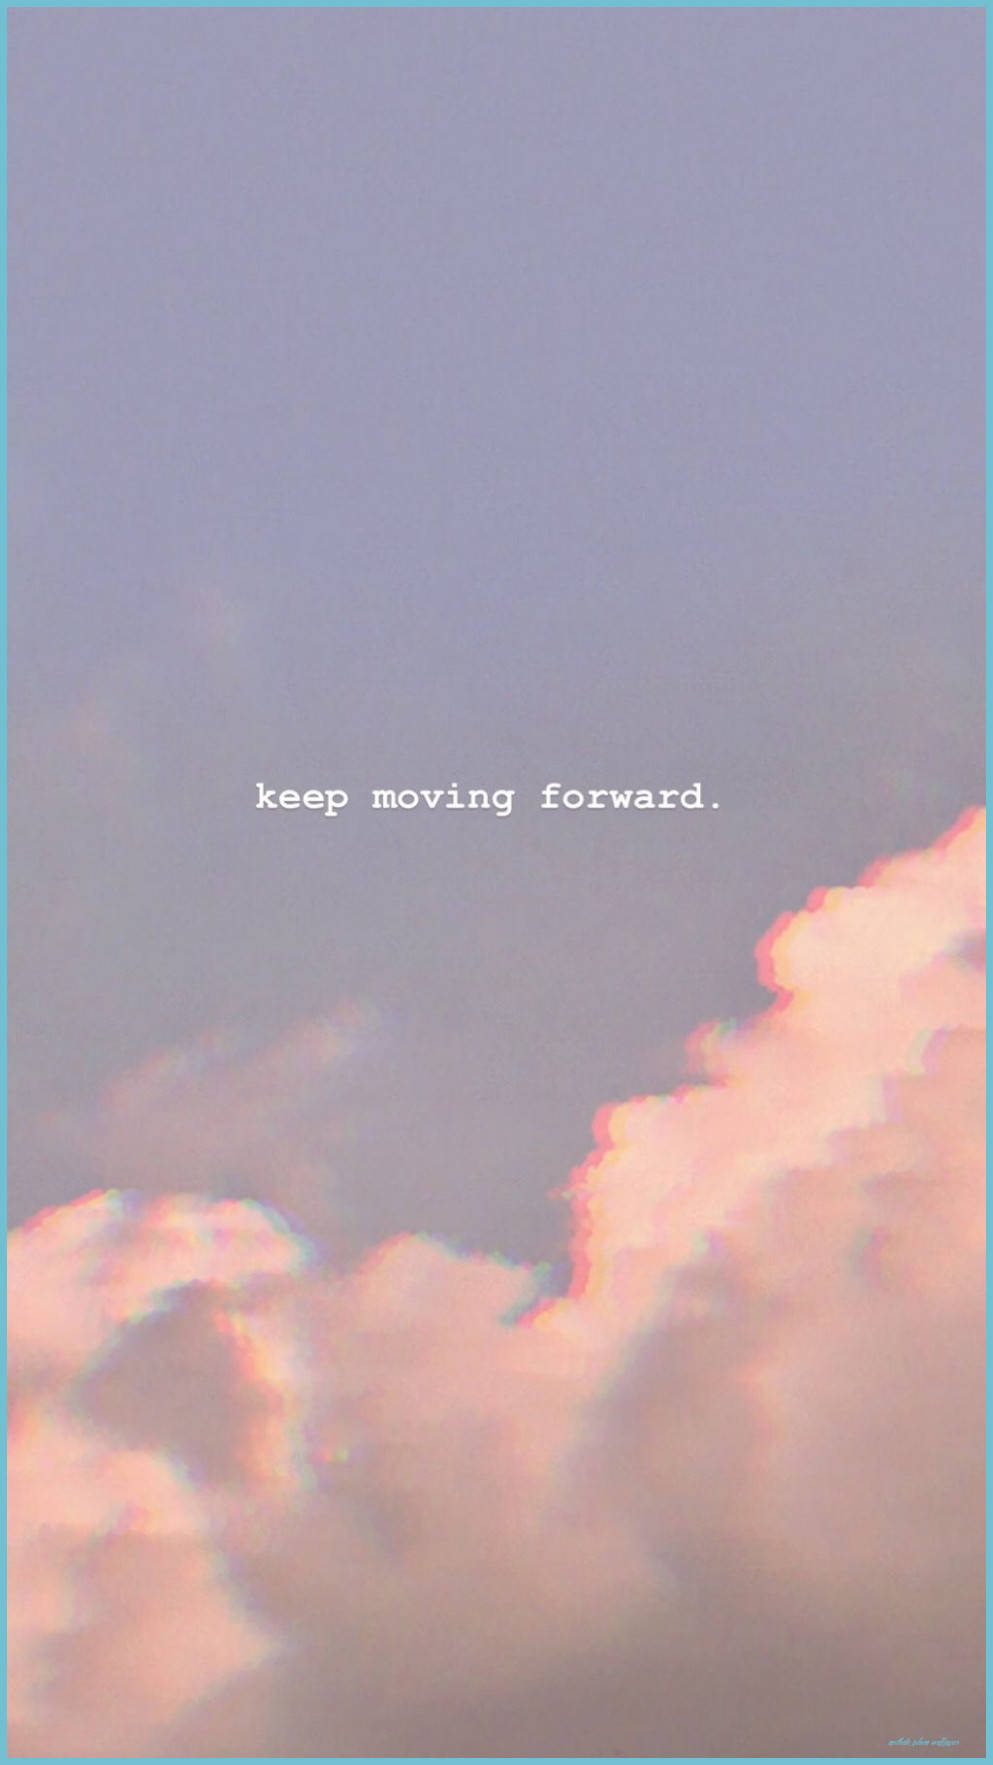 Pretty Aesthetic Text In The Clouds Wallpaper